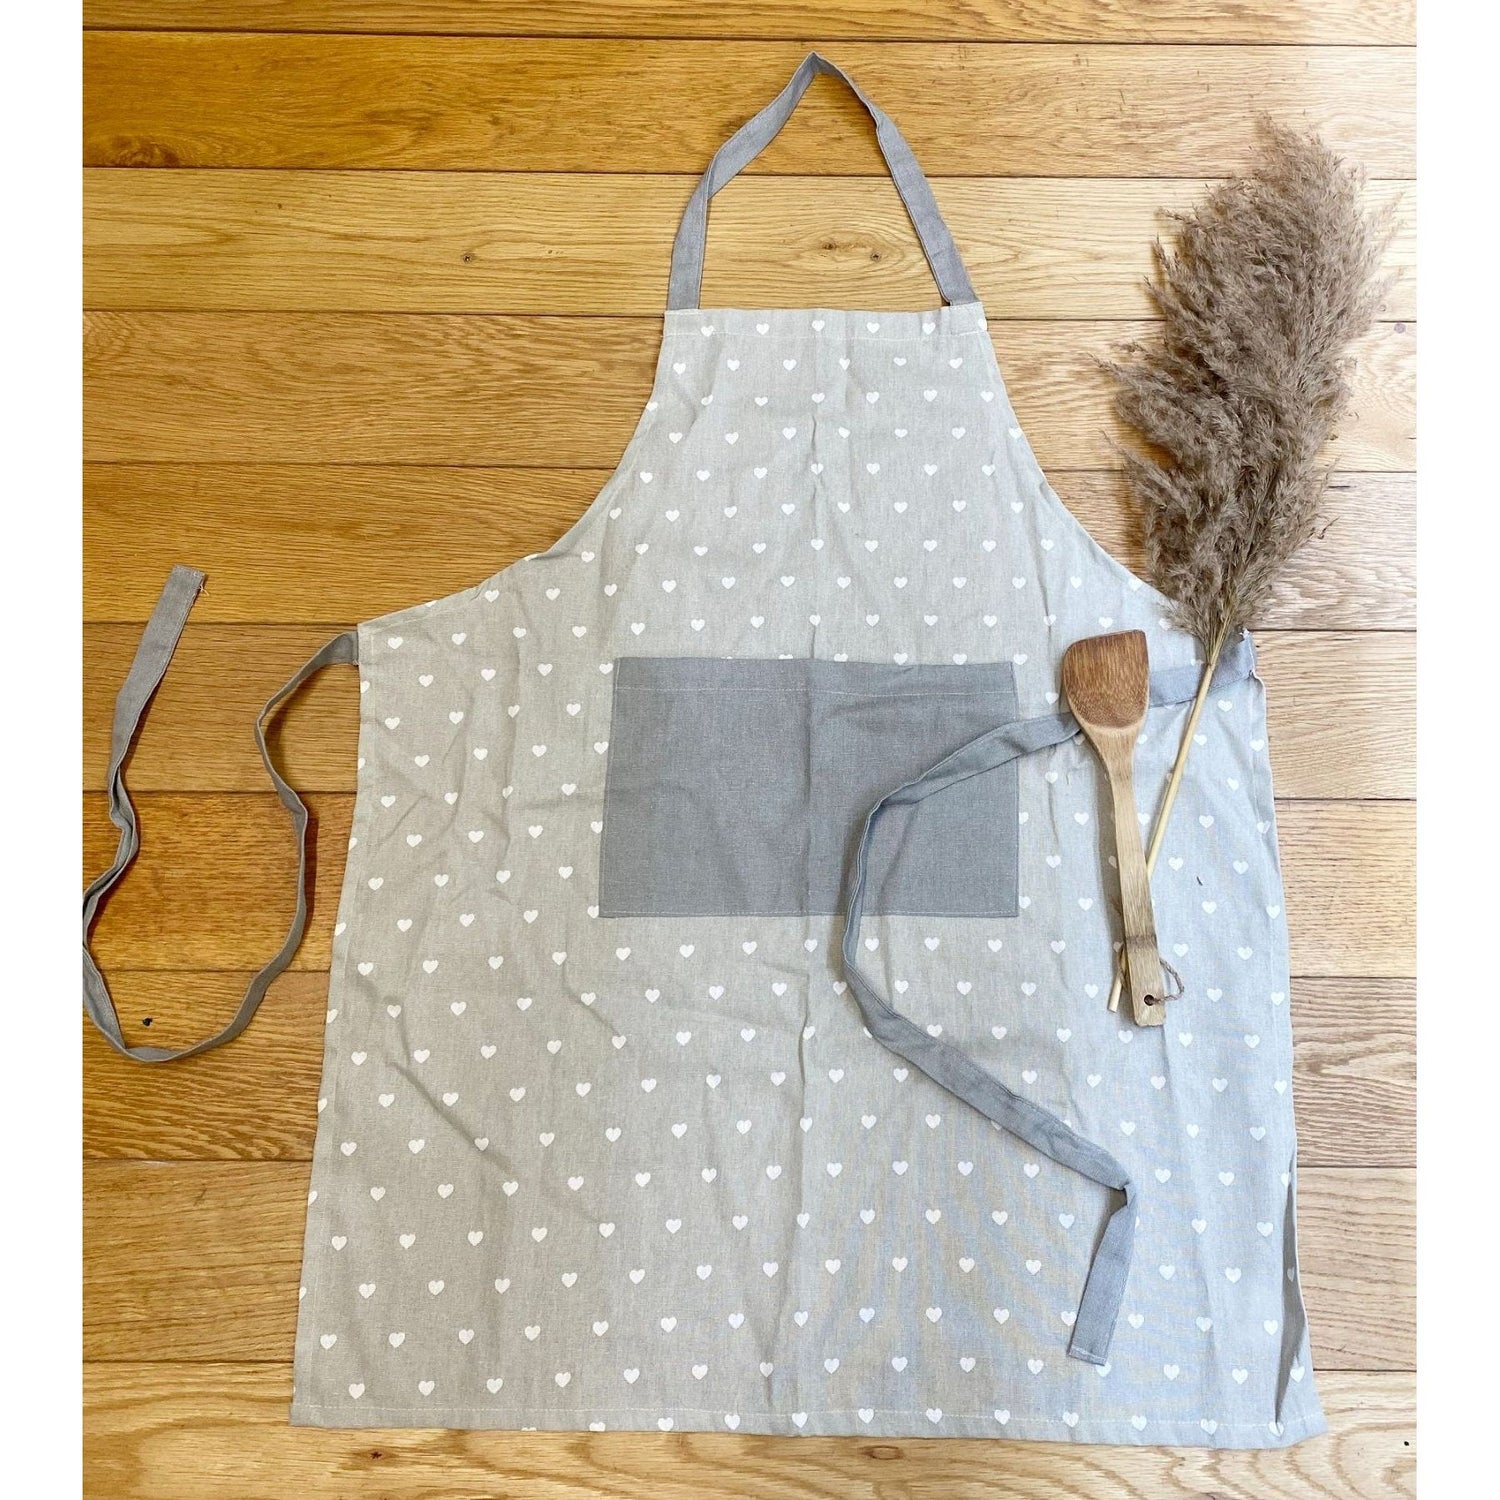 Kitchen Apron With A Grey Heart Print Design - Ashton and Finch